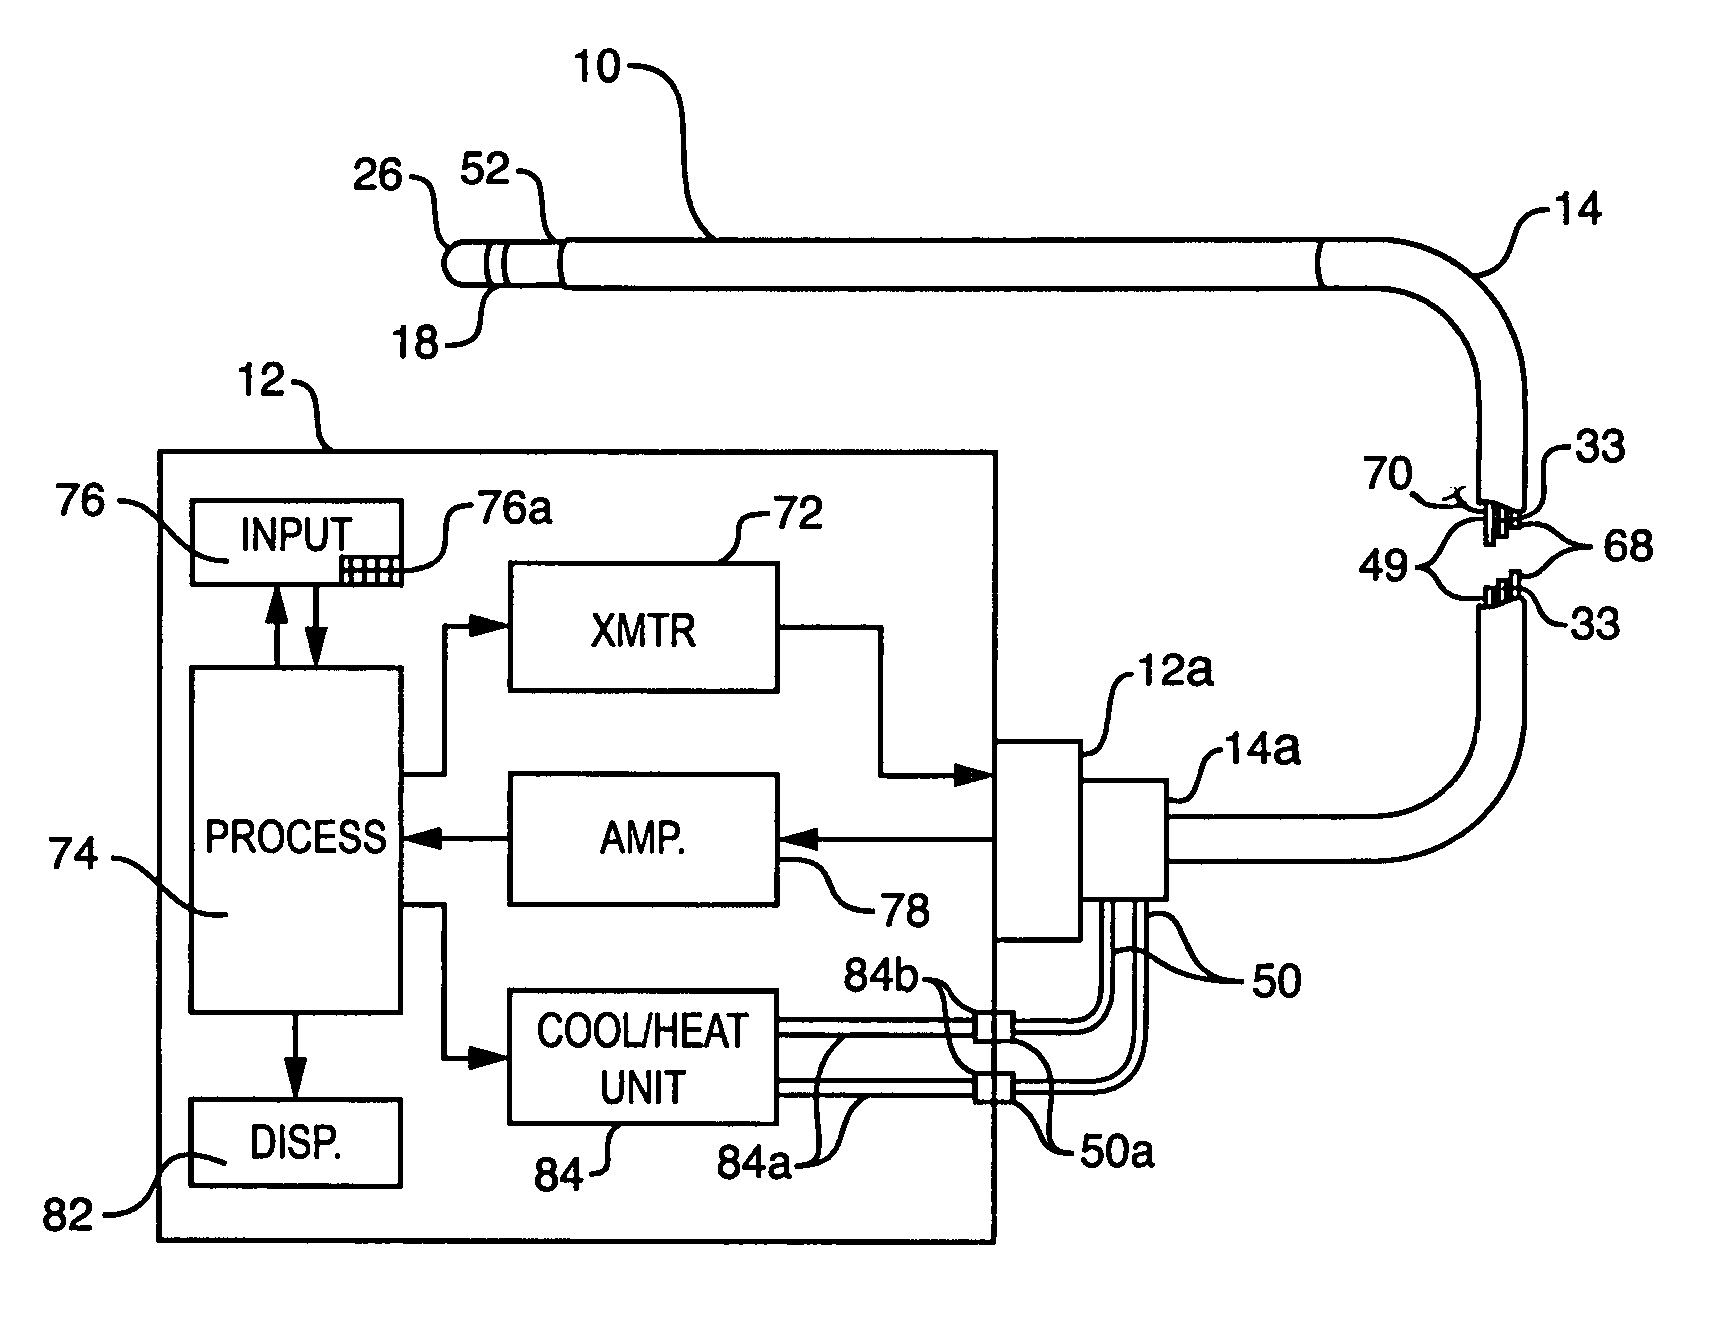 Integrated heating/sensing catheter apparatus for minimally invasive applications